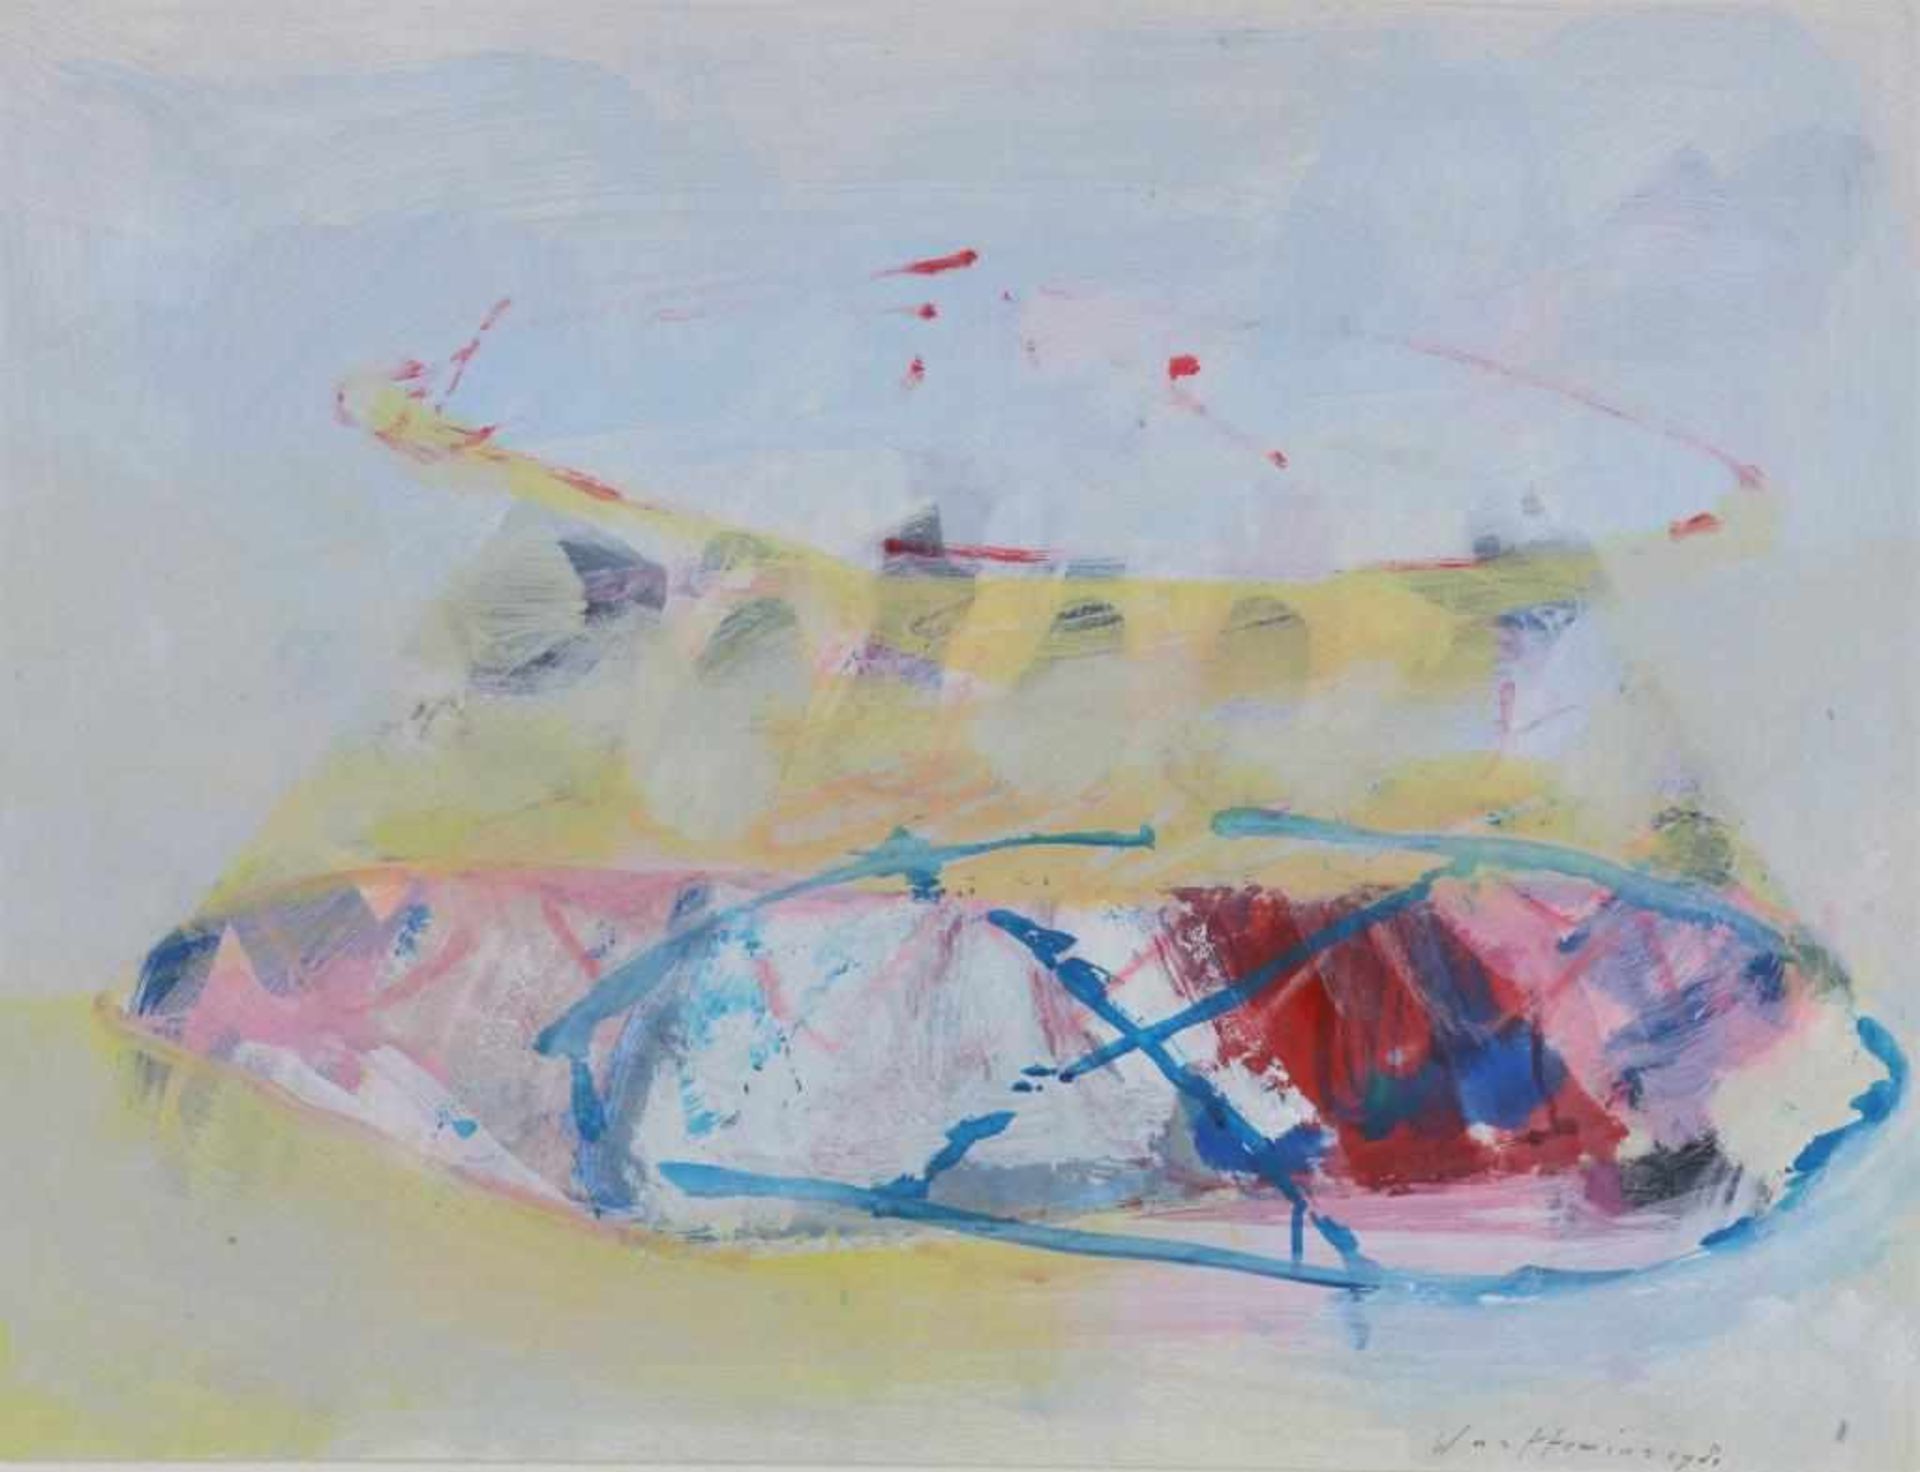 WARFFEMIUS, PIET (GEB. 1956), signed and dated 1983 l.r., composition, gouache on paper 47 x 61 cm.